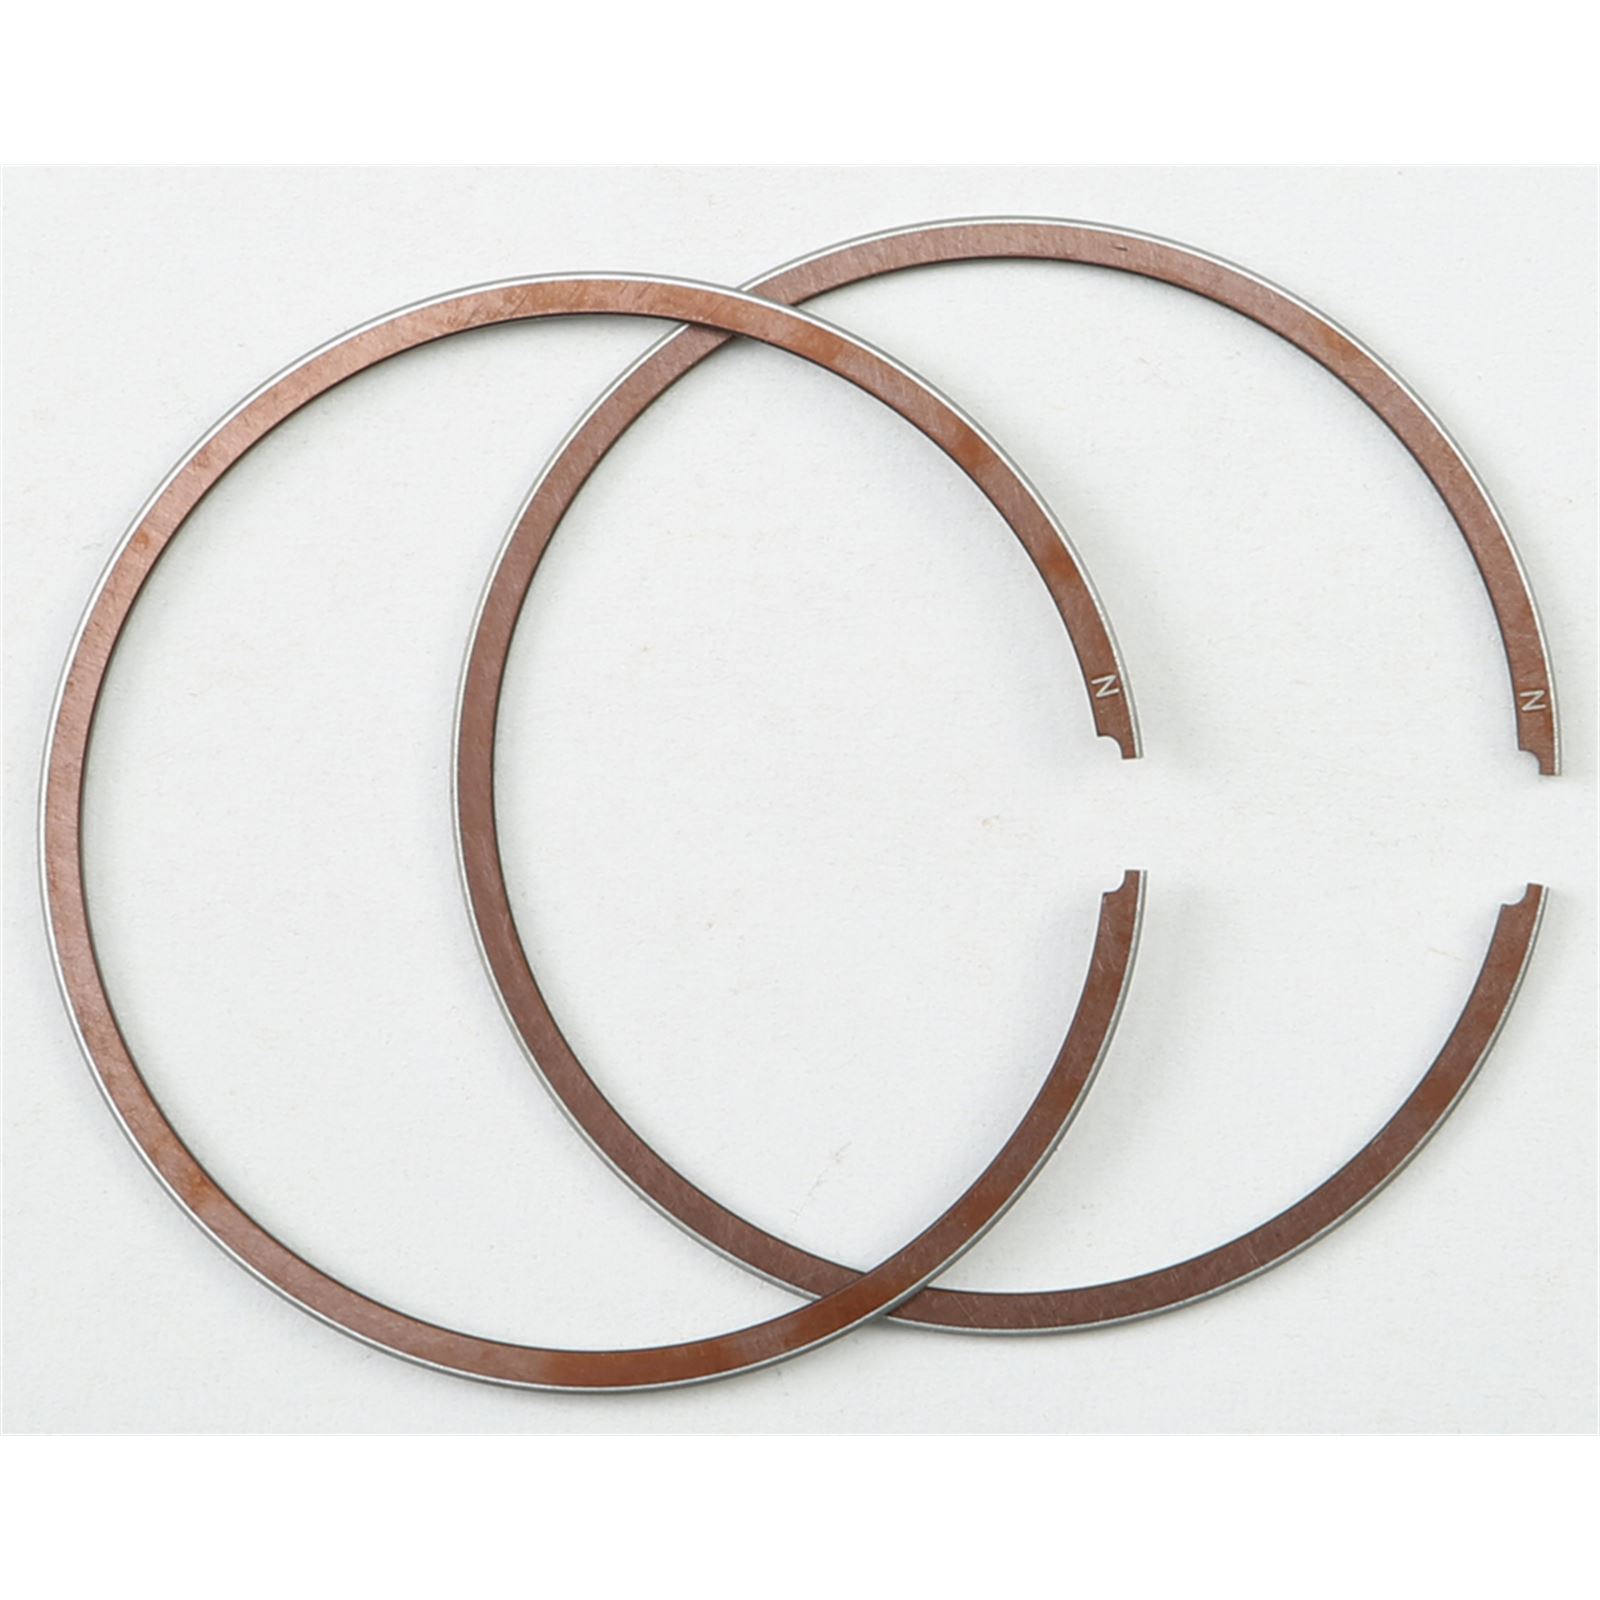 Wiseco 3858Xh Piston Rings For Wiseco Pistons Only 